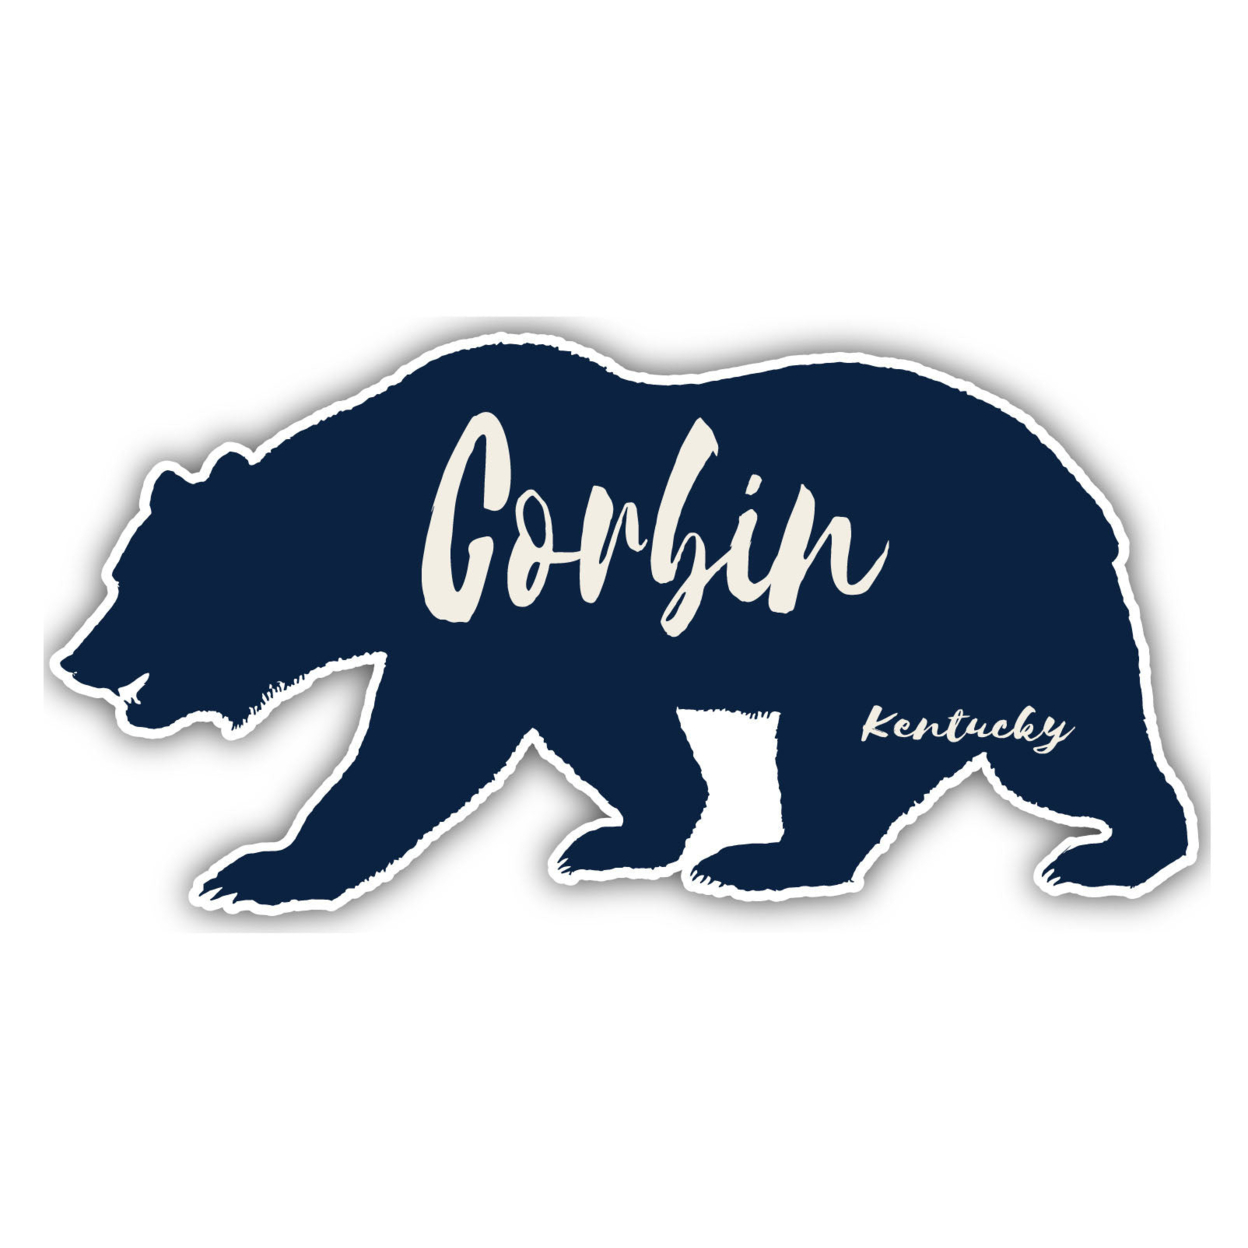 Corbin Kentucky Souvenir Decorative Stickers (Choose Theme And Size) - 4-Pack, 10-Inch, Camp Life